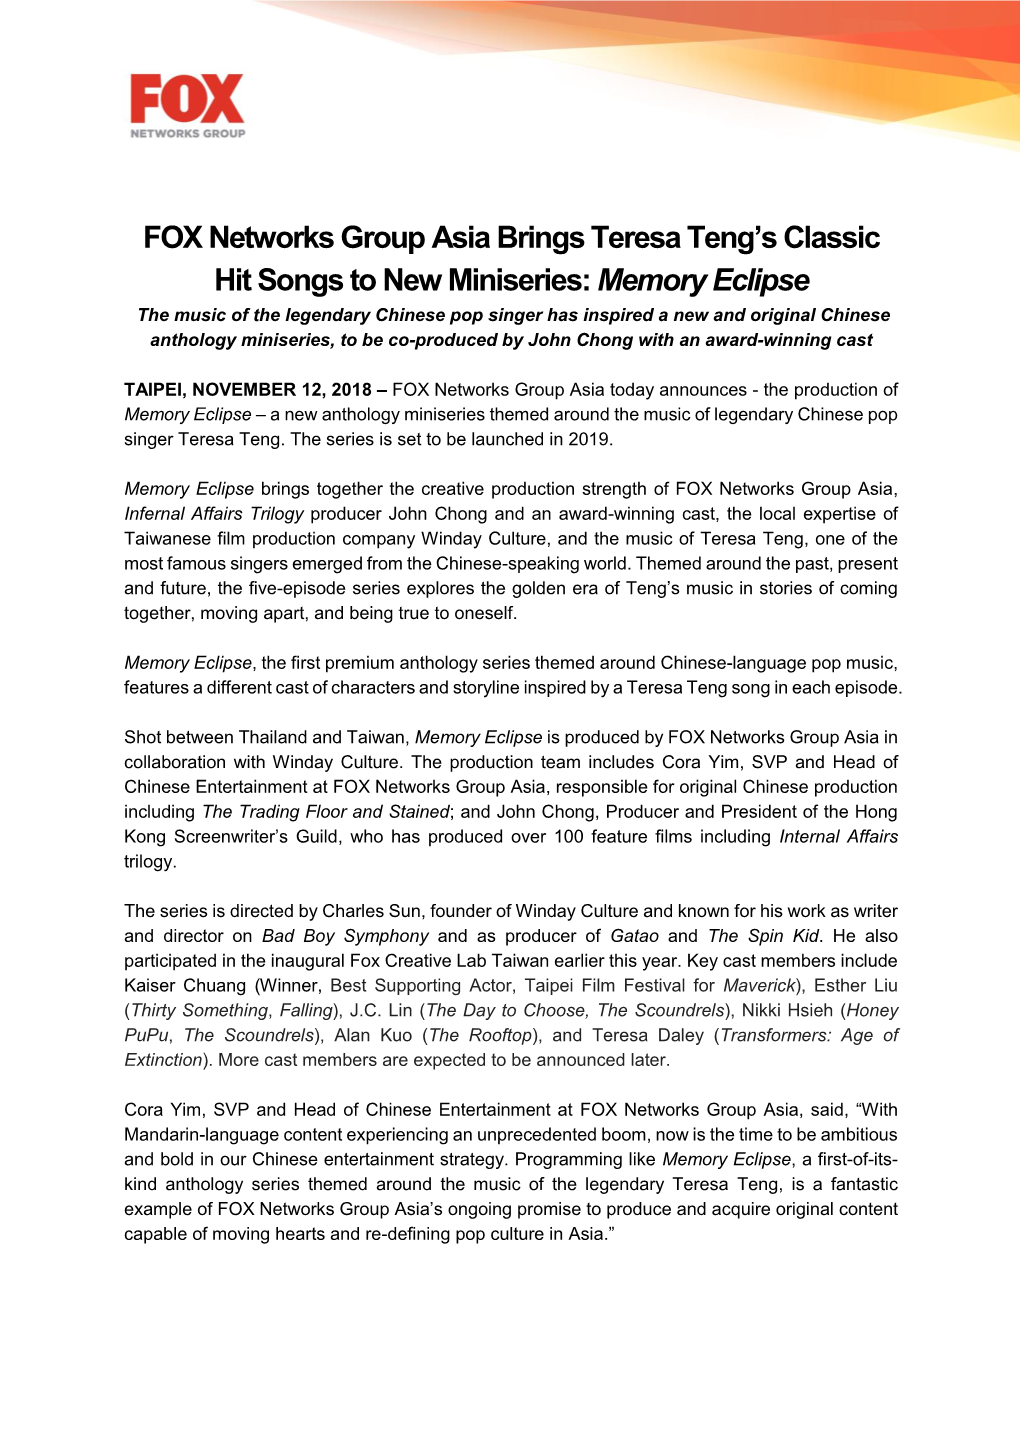 FOX Networks Group Asia Brings Teresa Teng's Classic Hit Songs To